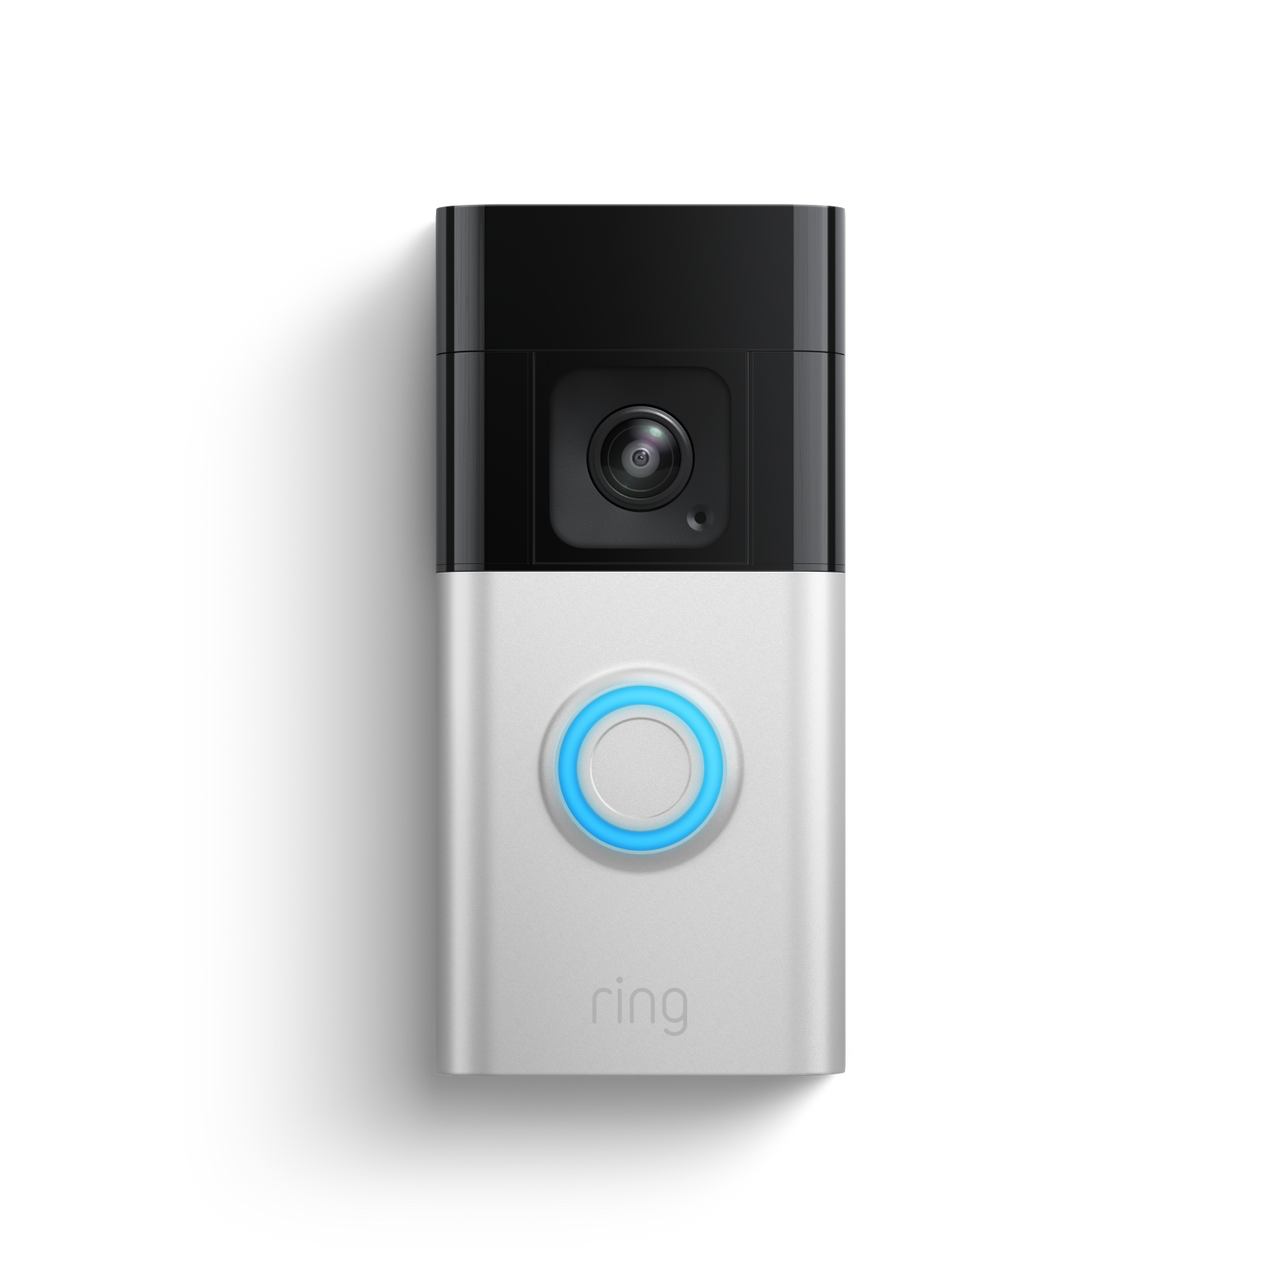 files/ring_battery-video-doorbell-pro_sn_01_product_front_wall_1500x1500_b55c2215-800f-40c4-87a9-2cb8a5530d39.png